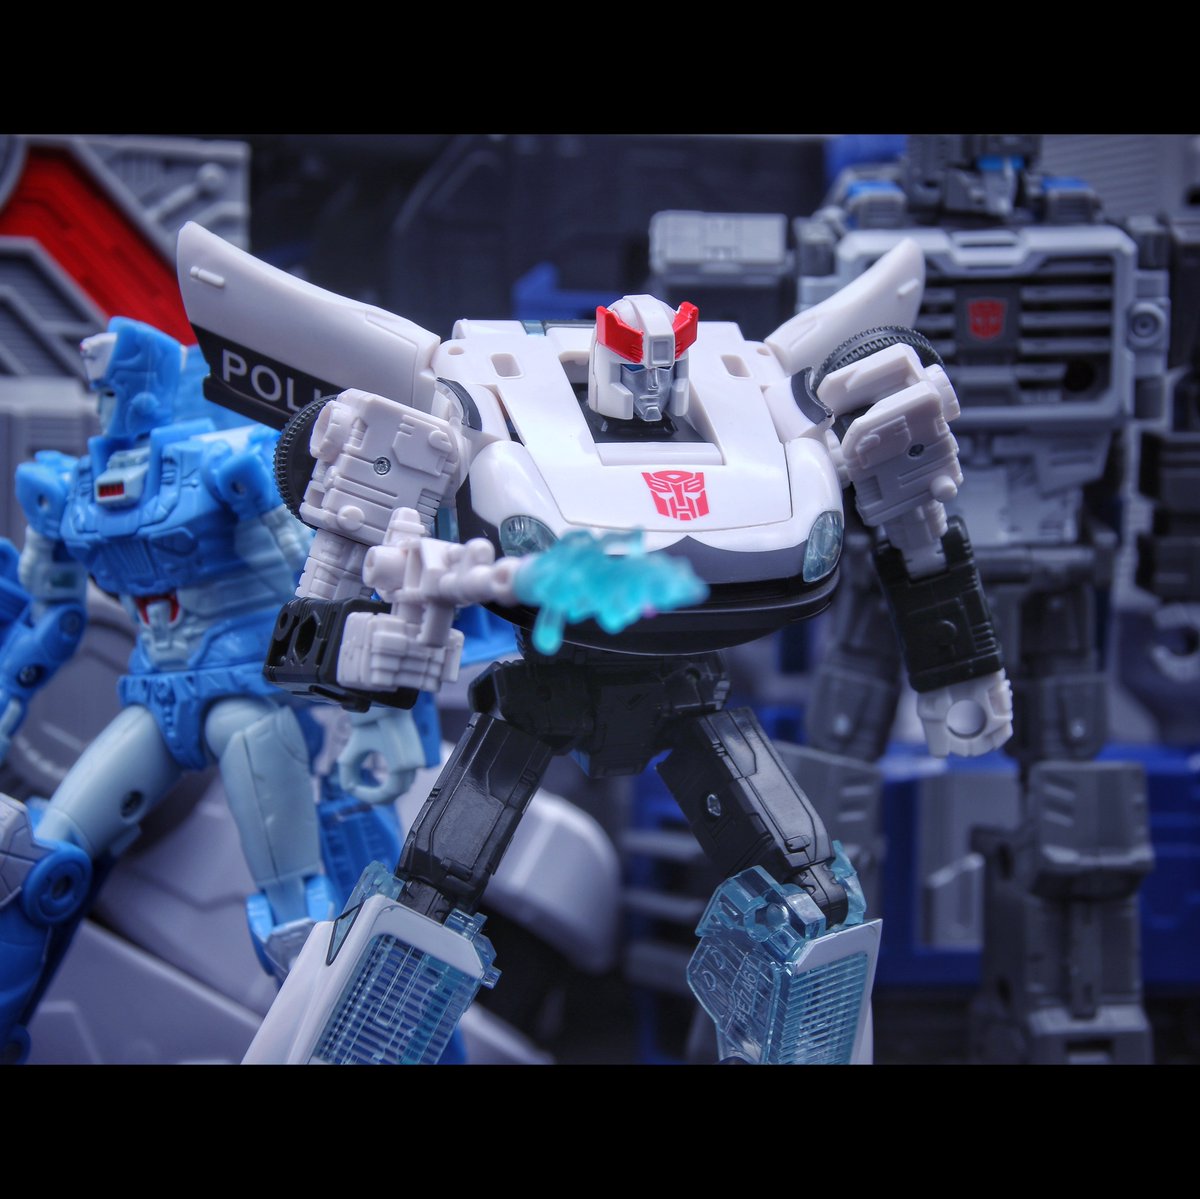 Hold the perimeter!

#transformers #toyphotography